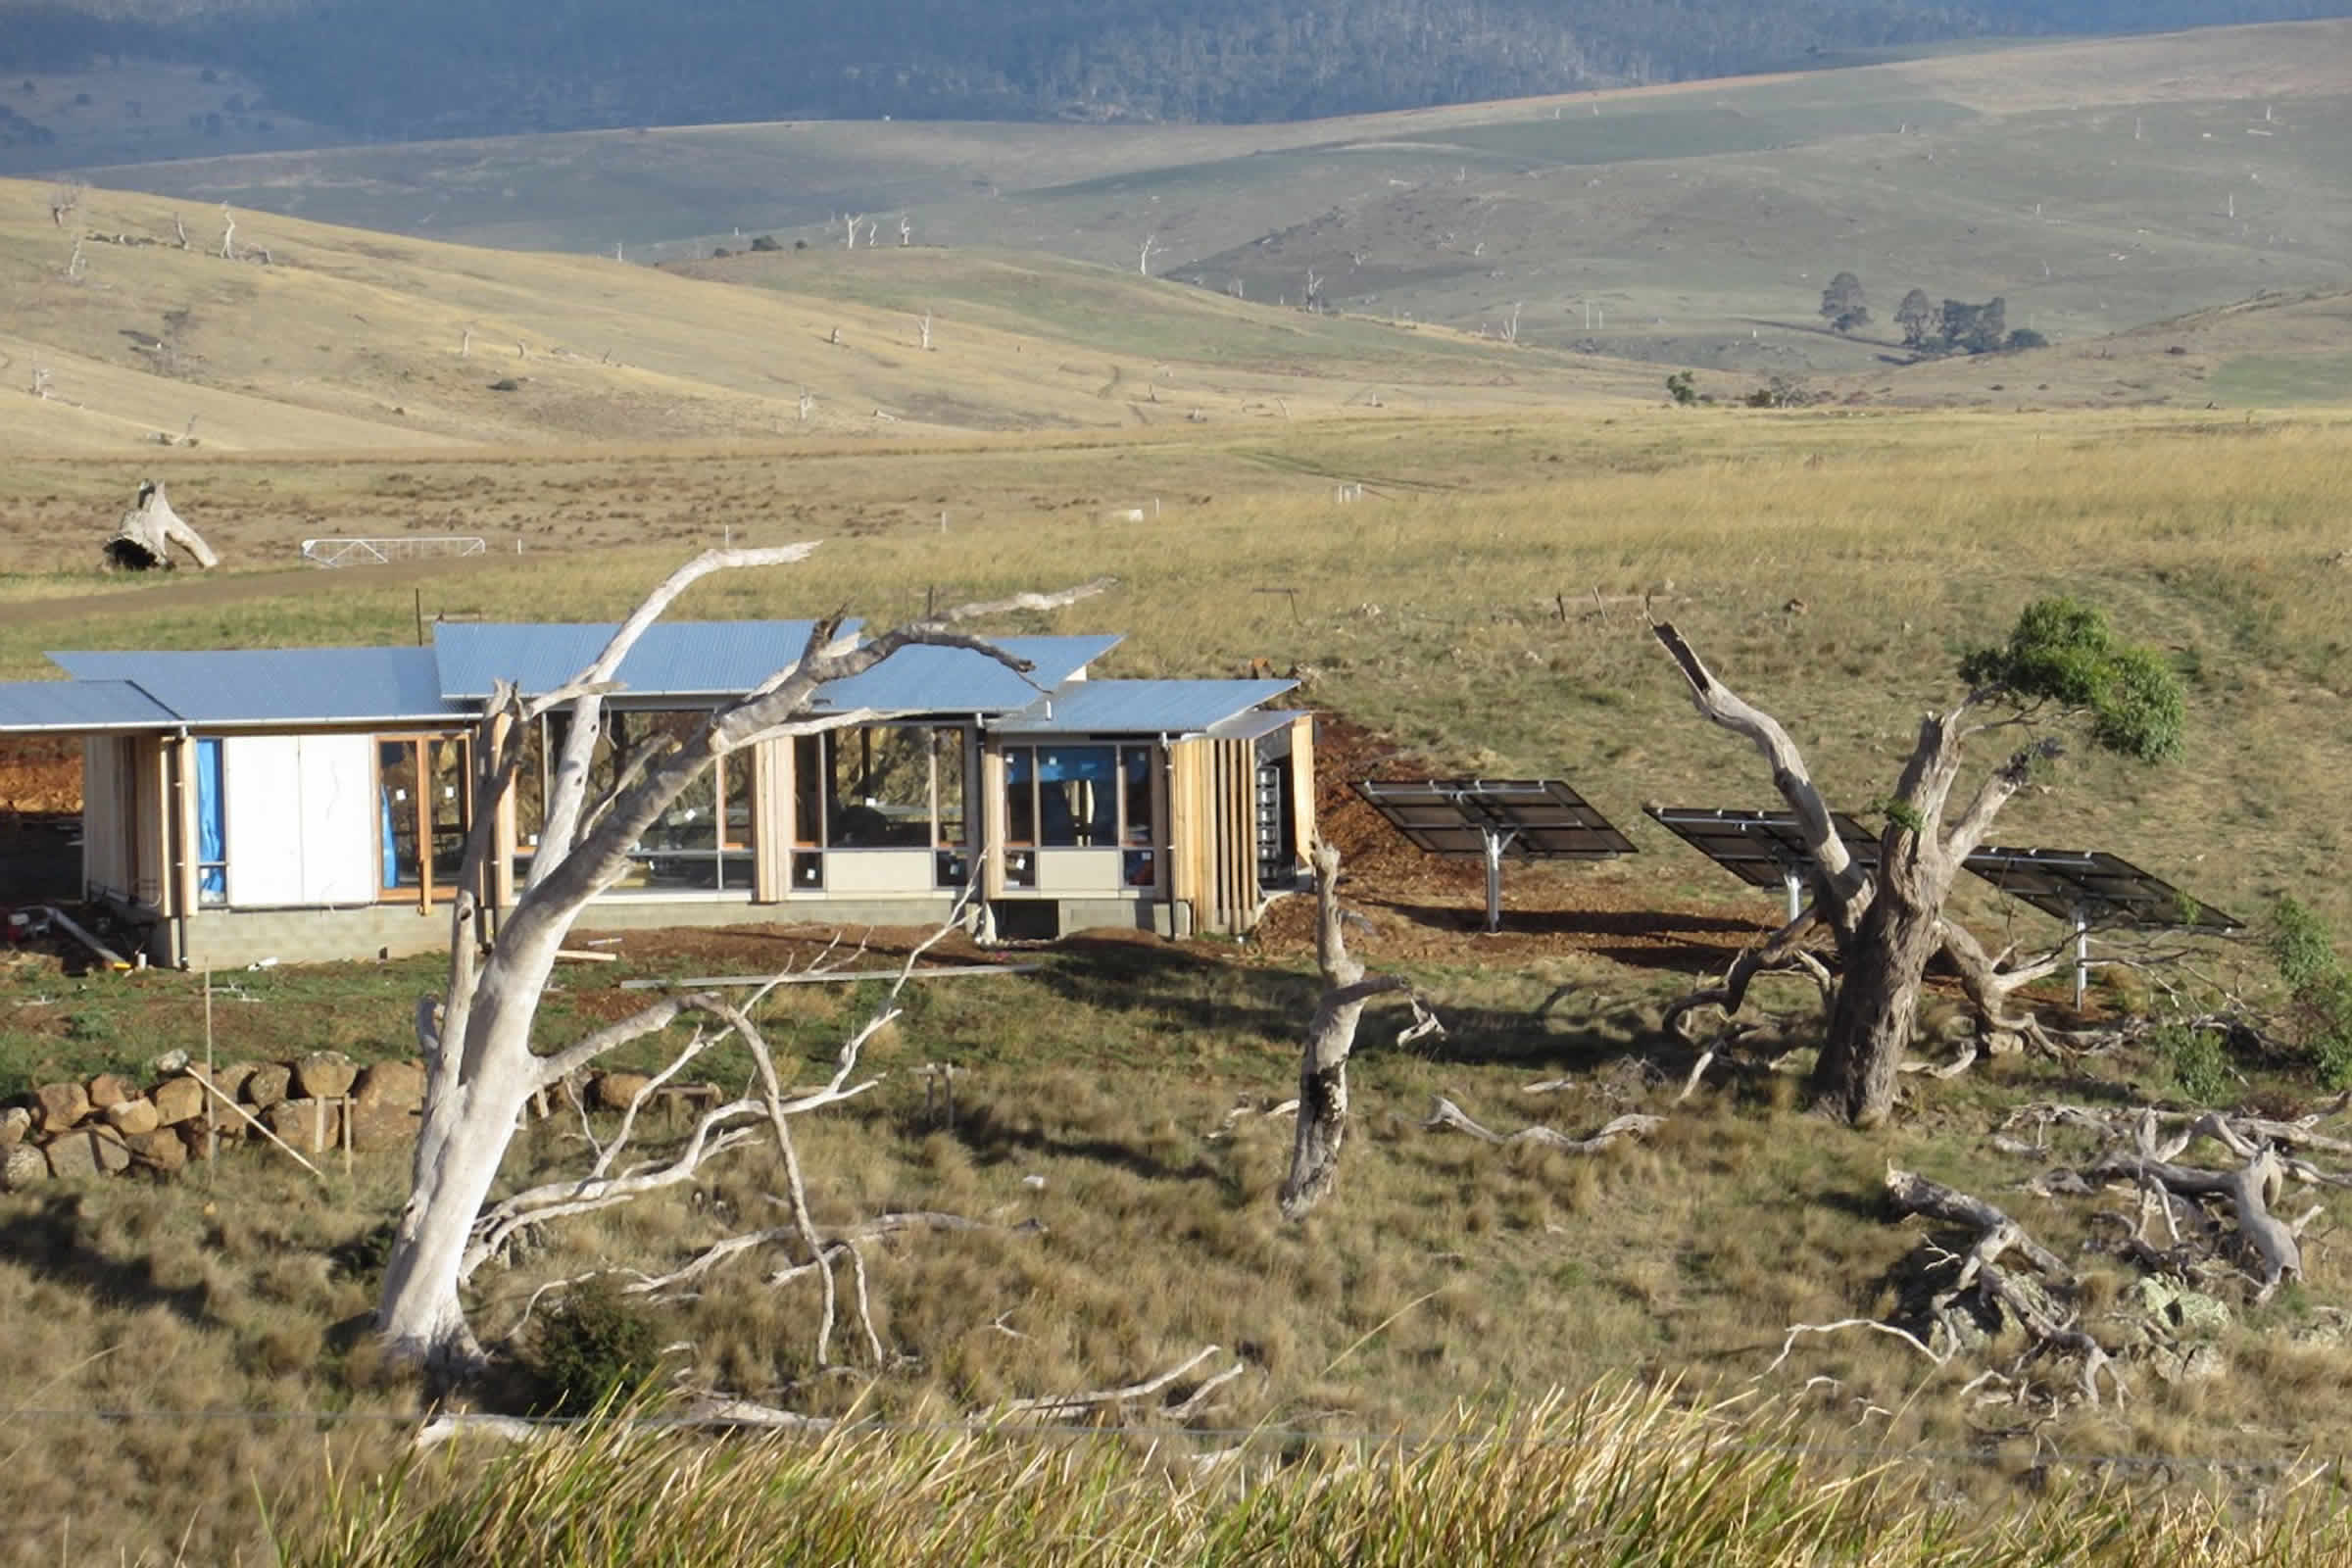 White Gum Wool, Oatlands, Tasmania: The off-grid energy efficient farmhouse has photovoltaic power and solar hot water. Hydronic floor heating and passive solar design features ensure constant year round temperature comfort.